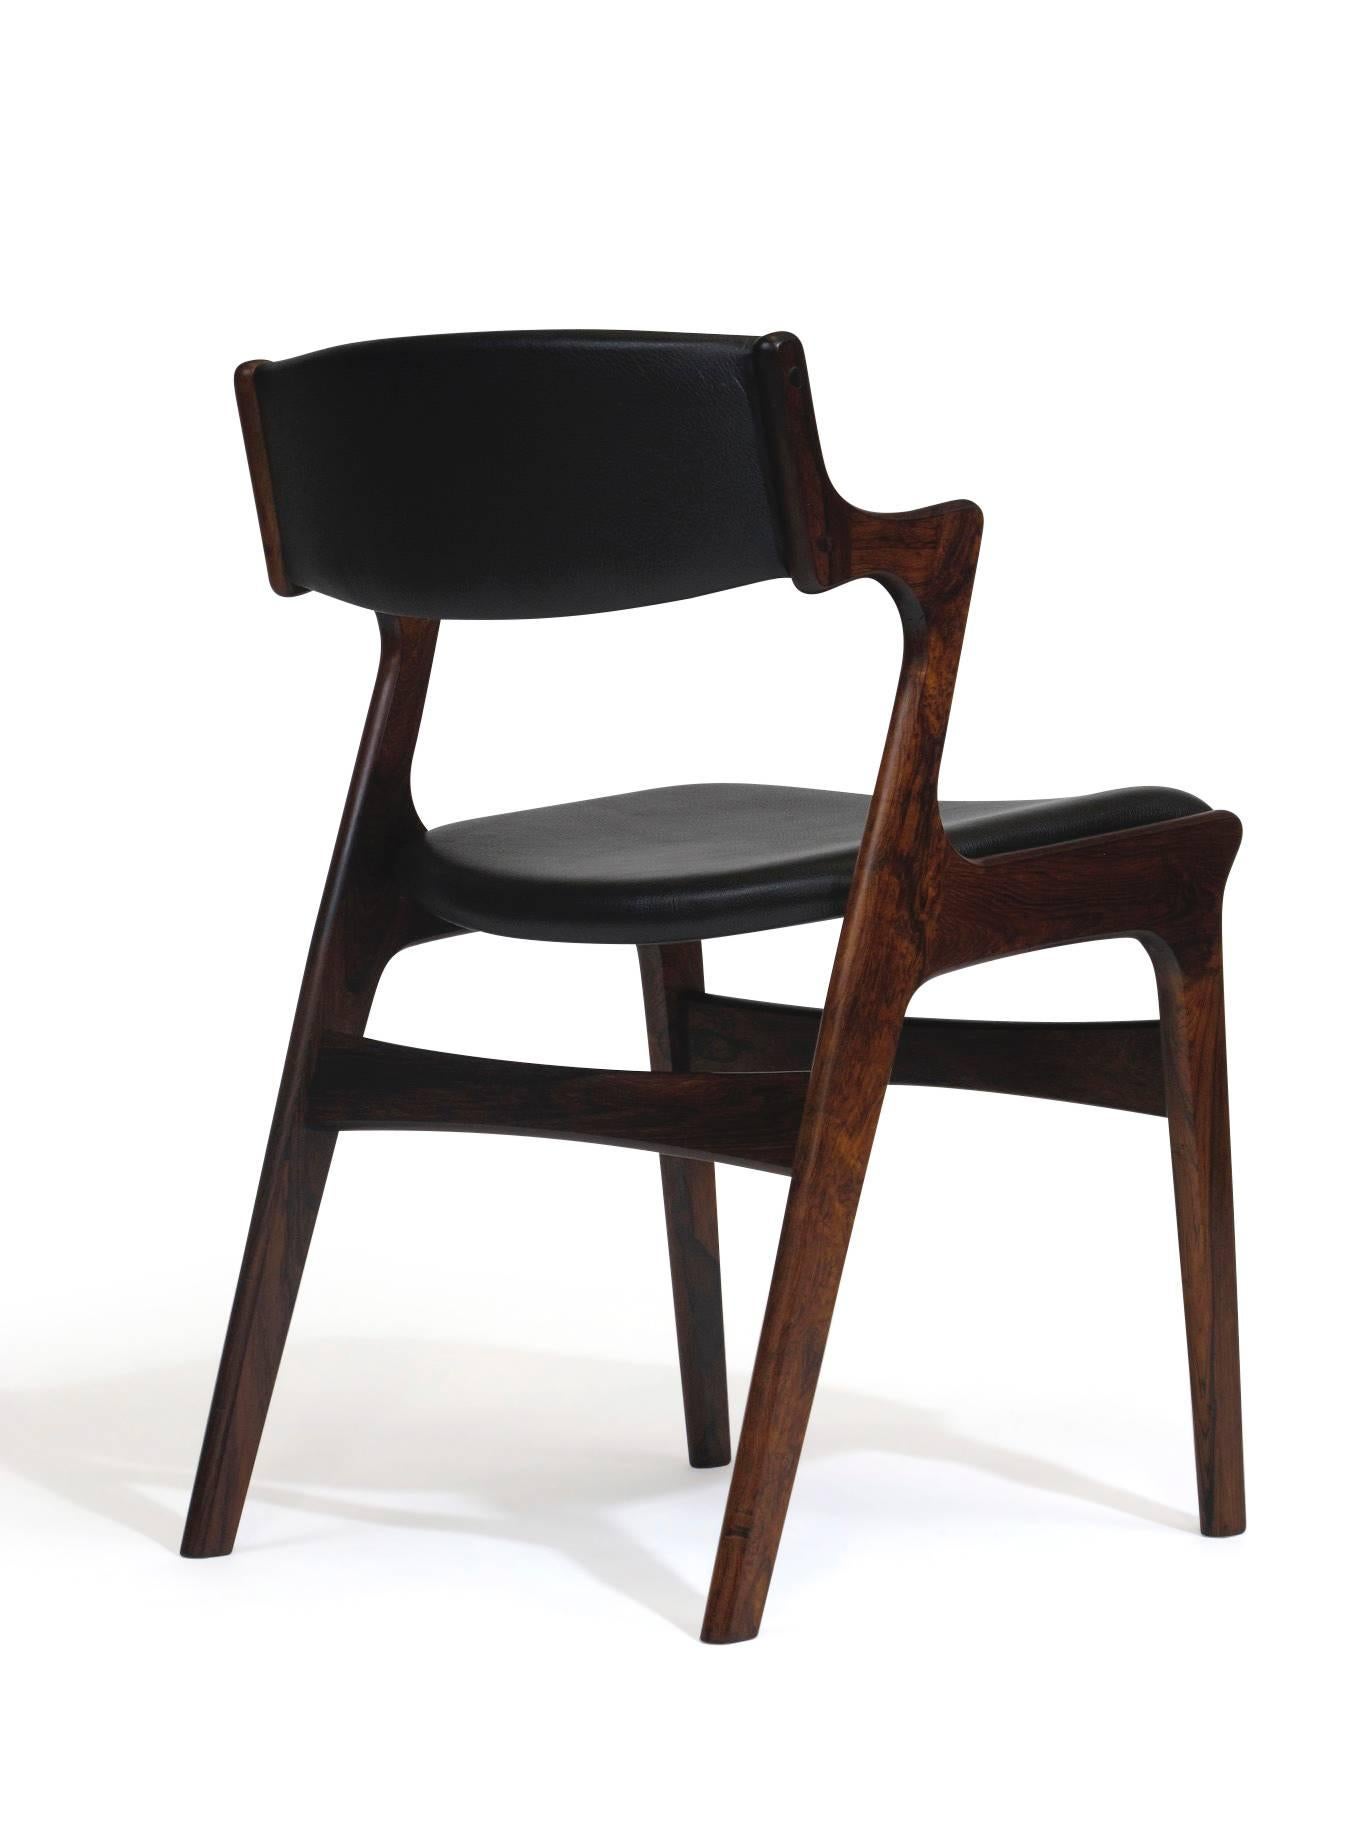 Oiled Four Danish Rosewood and Black Leather Dining Chairs